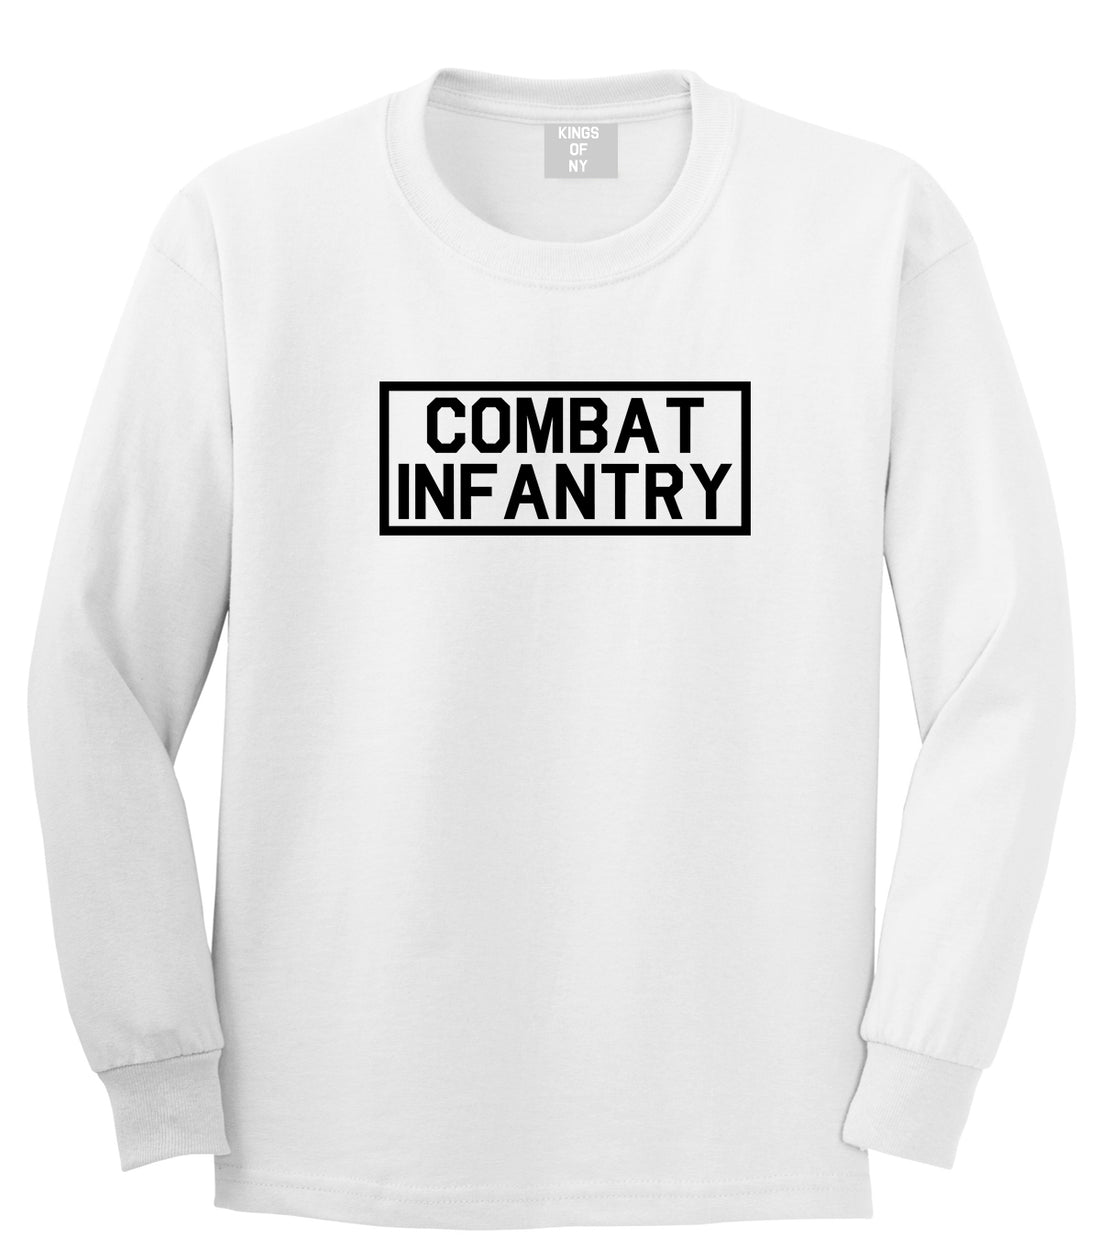 Combat Infantry White Long Sleeve T-Shirt by Kings Of NY